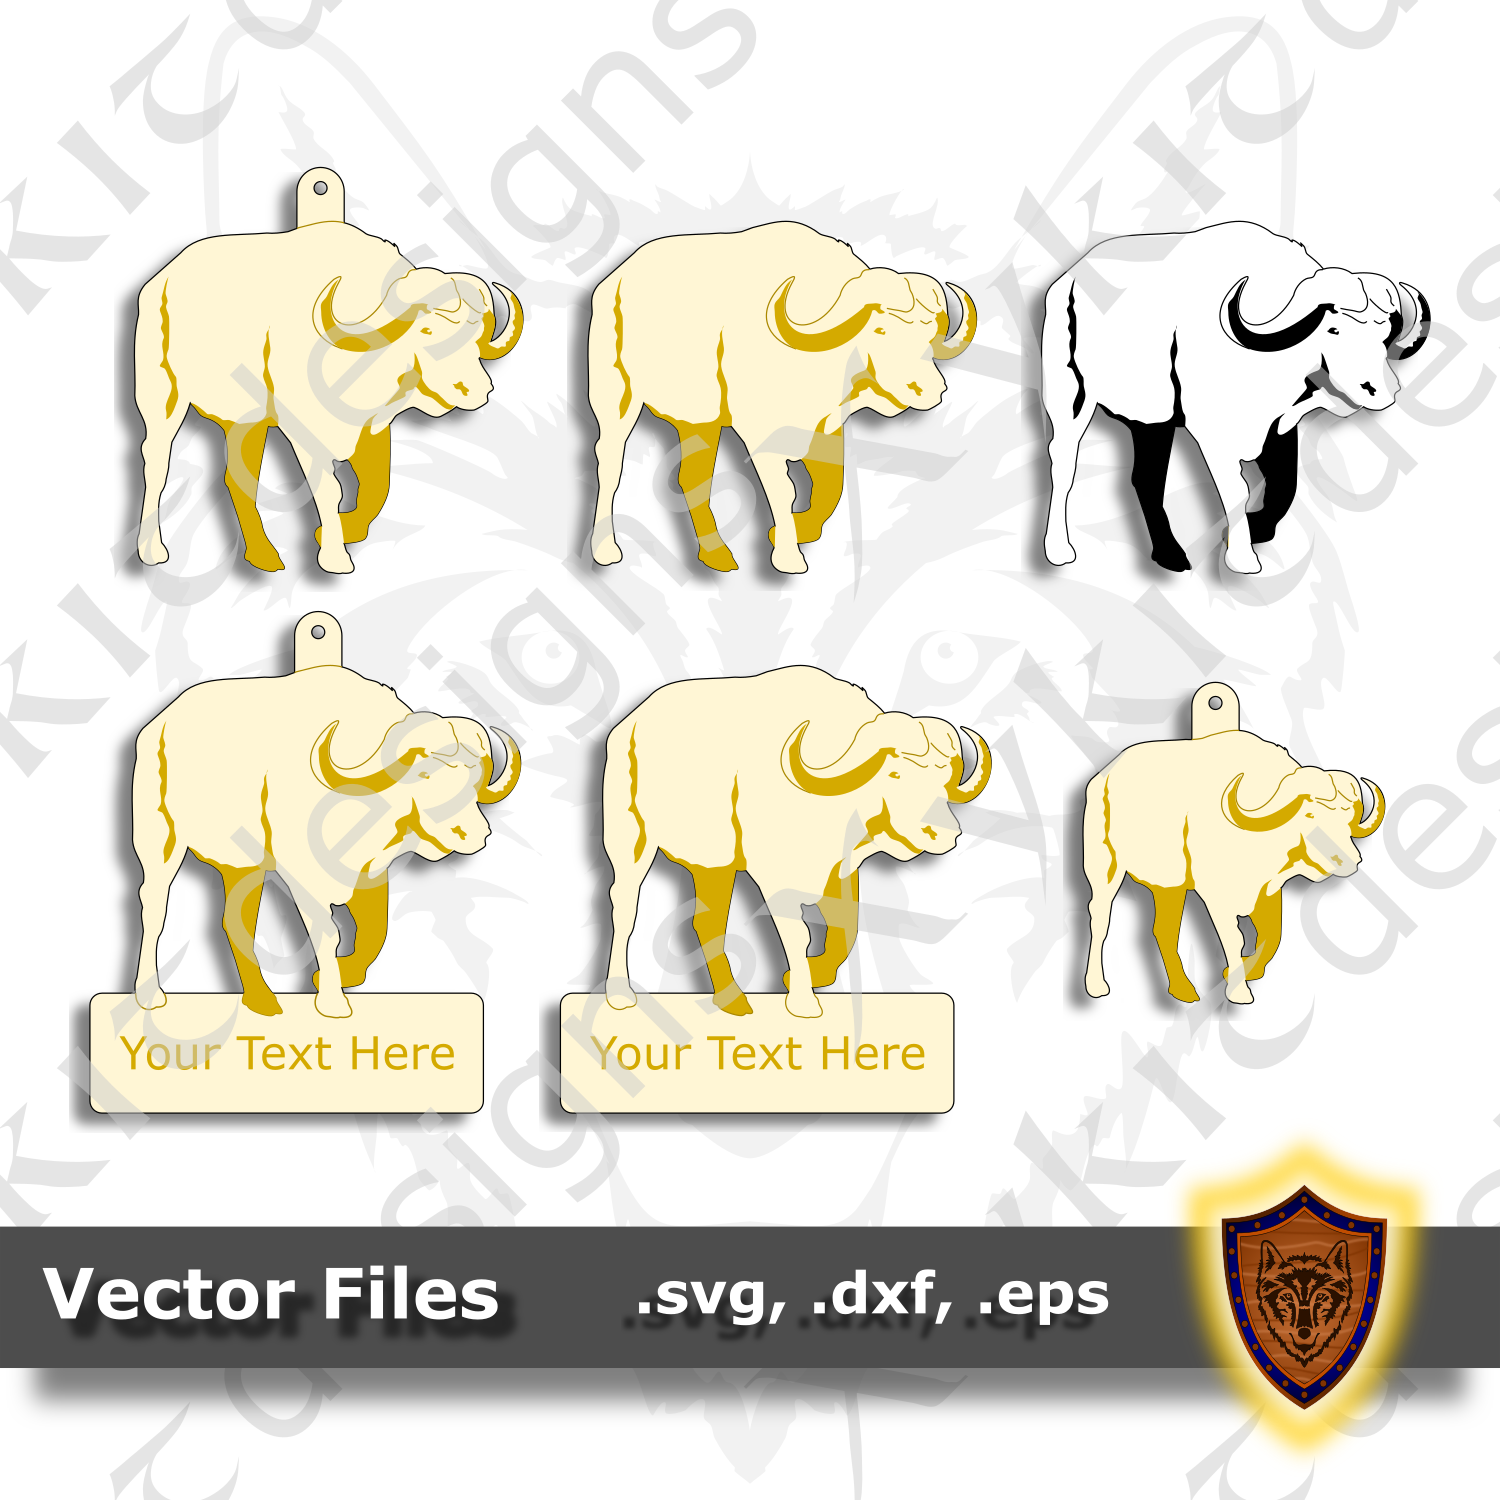 Download African Cape Buffalo - Animal Ornament - Magnet - Key Chain - (SVG, DX - Xykit